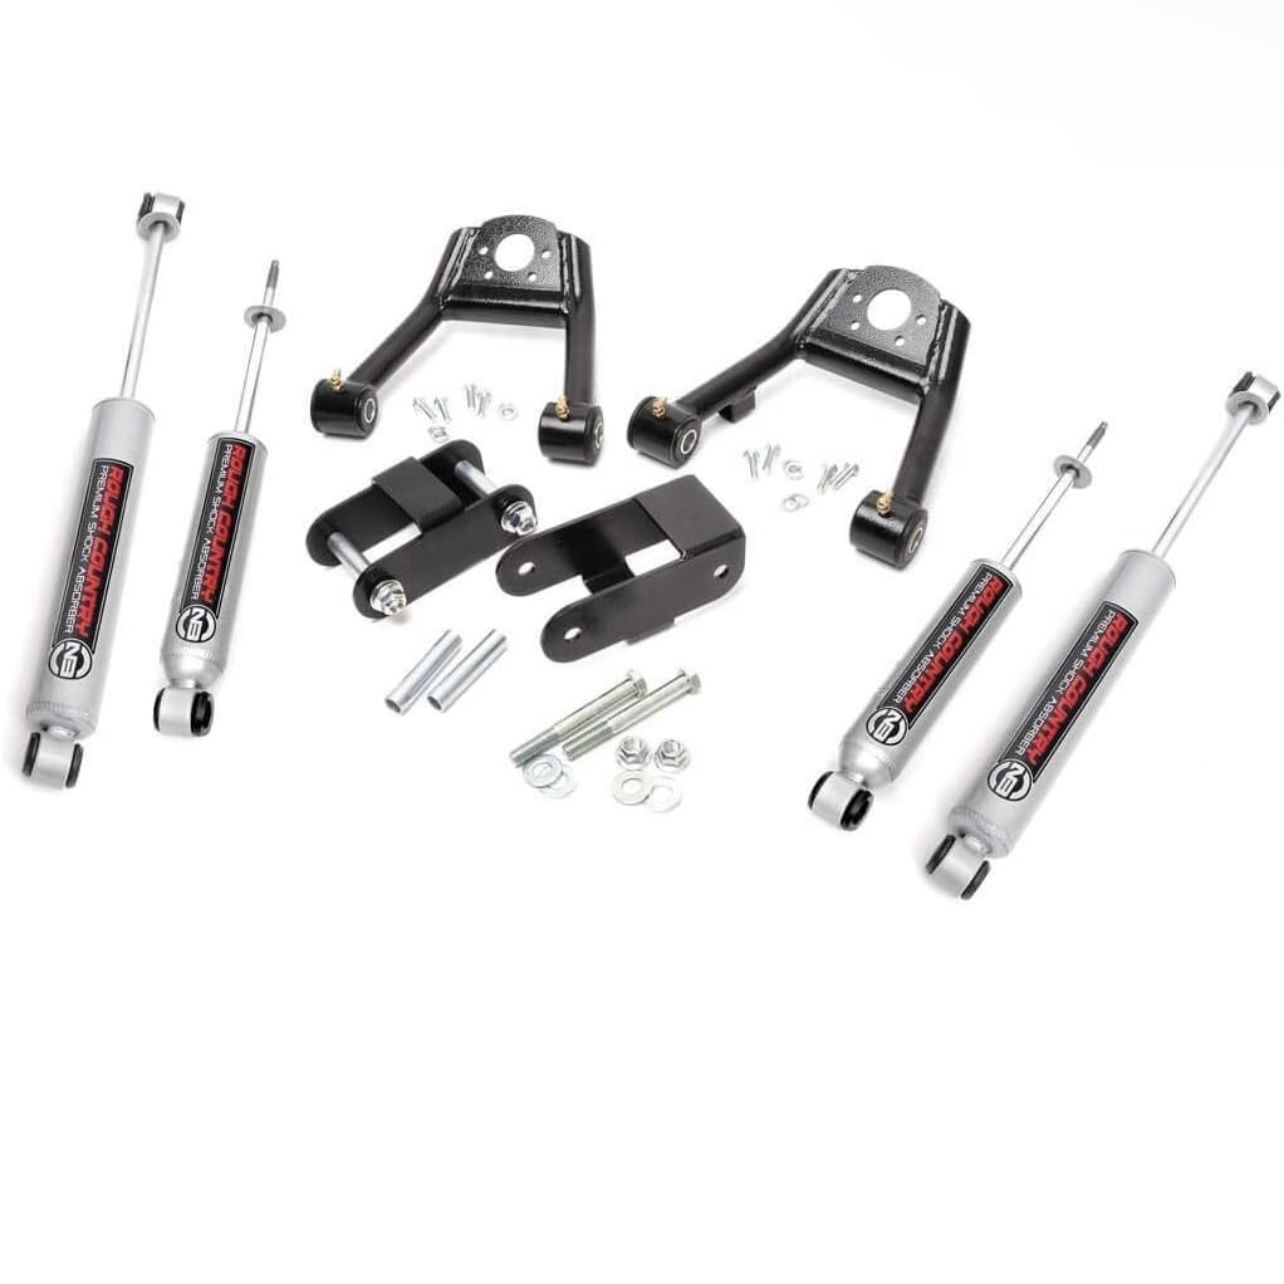 1.5-2 Inch Lift Kit | Nissan D21 Hardbody Truck 4WD (1(contact info removed))